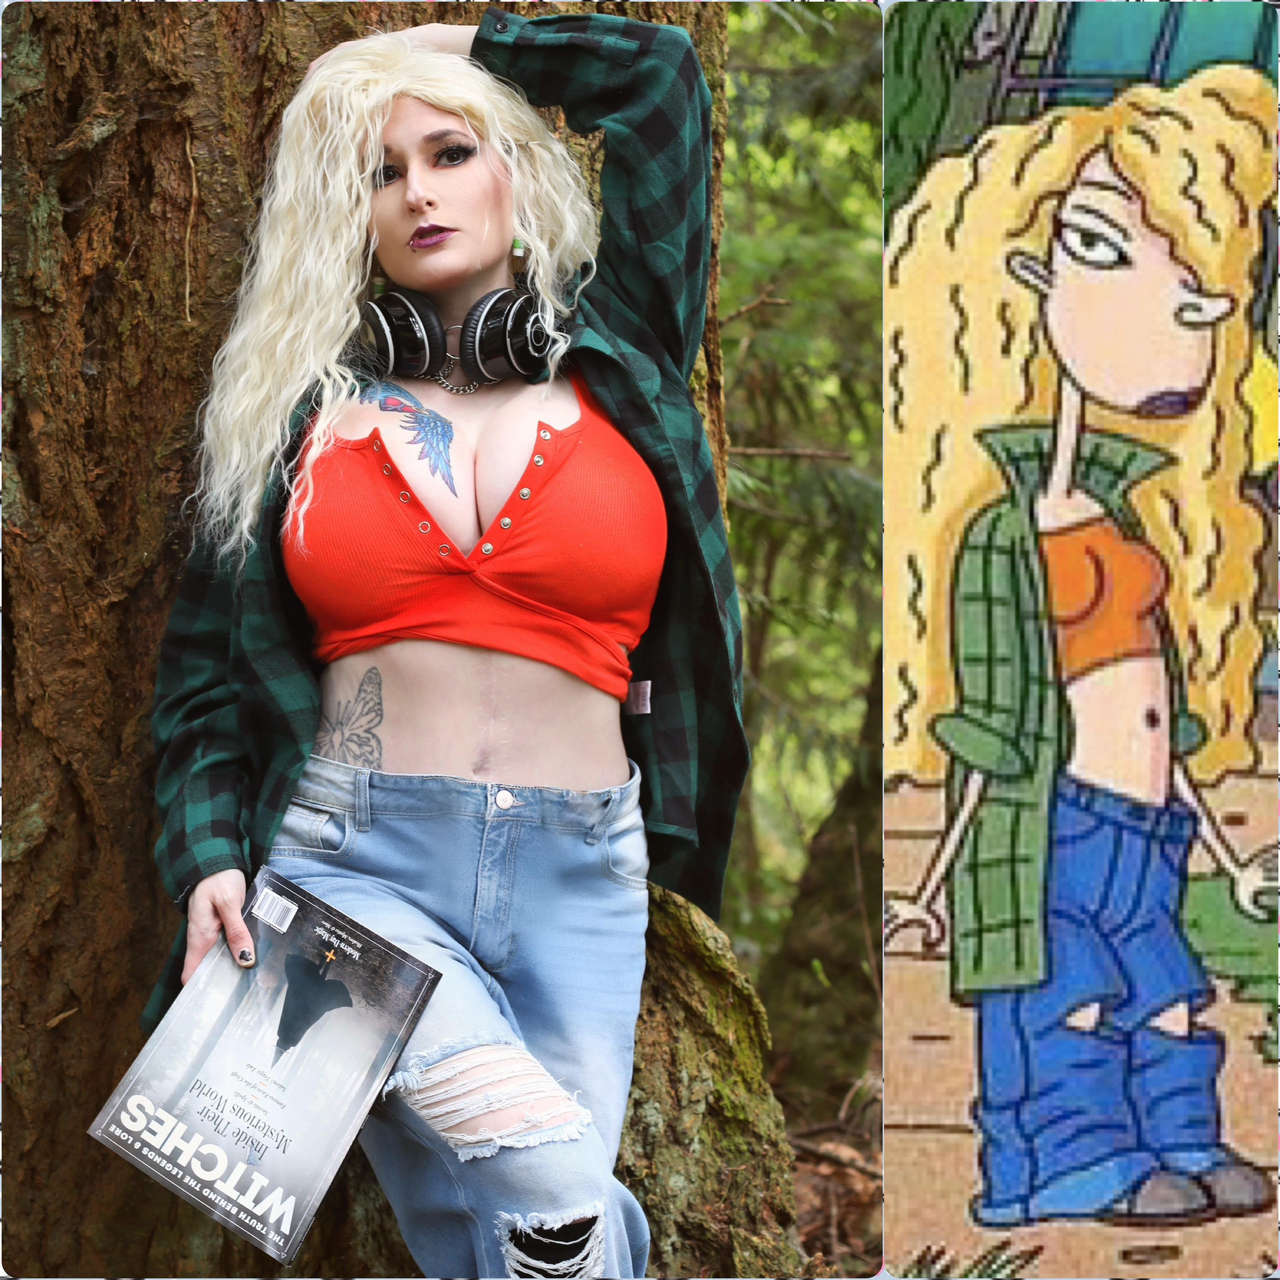 Self Debbie Thornberry From The Wild Thornberrys Cosplay By Captive Cospla